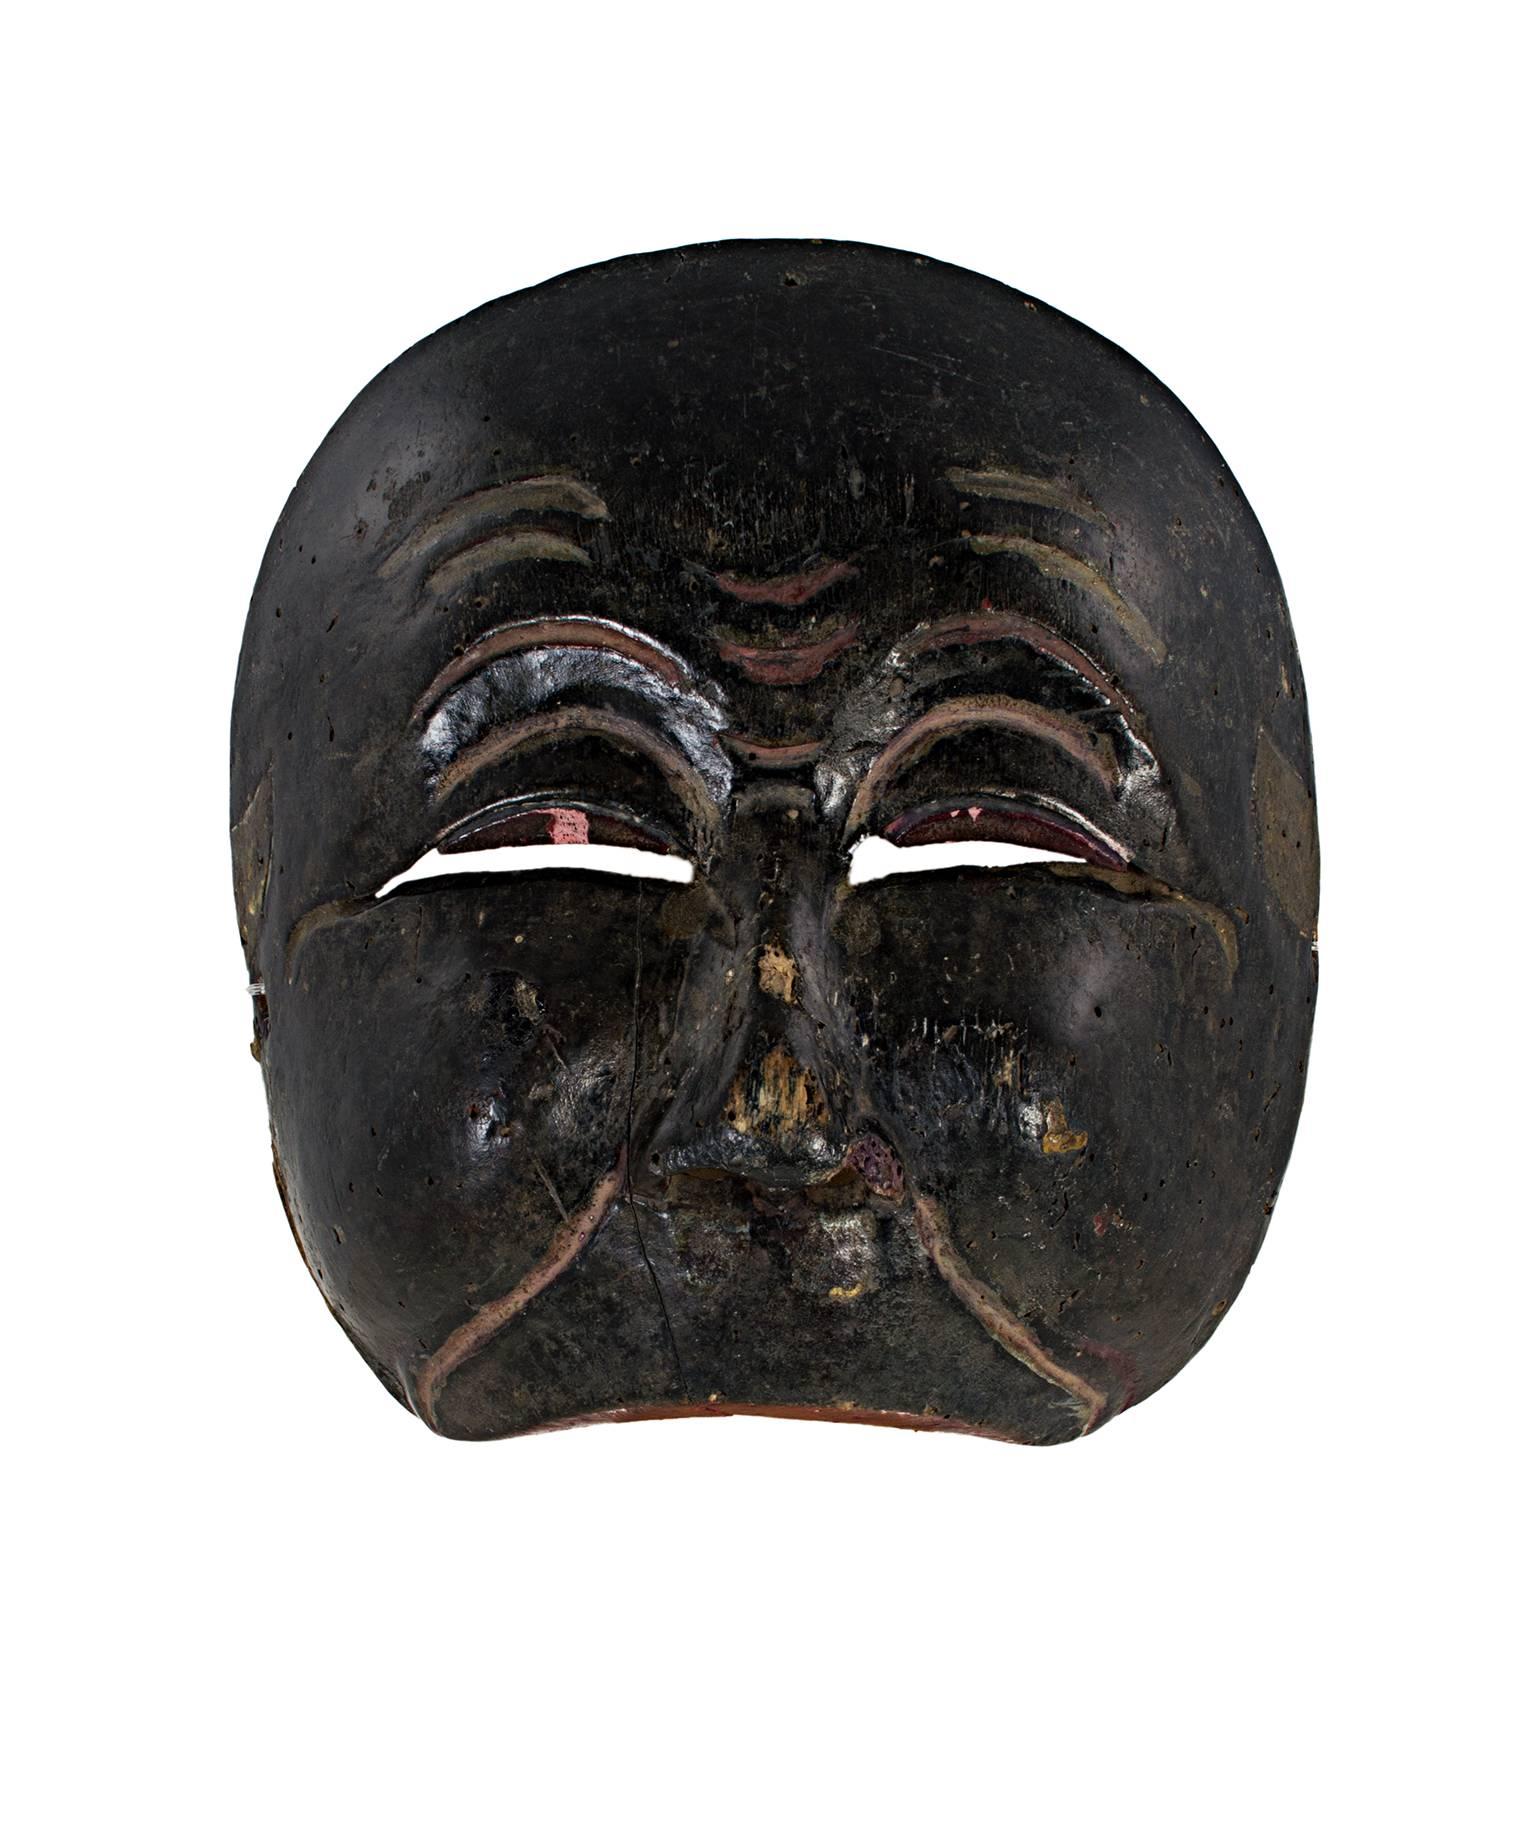 "Indonesian, Half Mask with Slanted Eyes, " Carved from Wood & Painted 19th Cen.